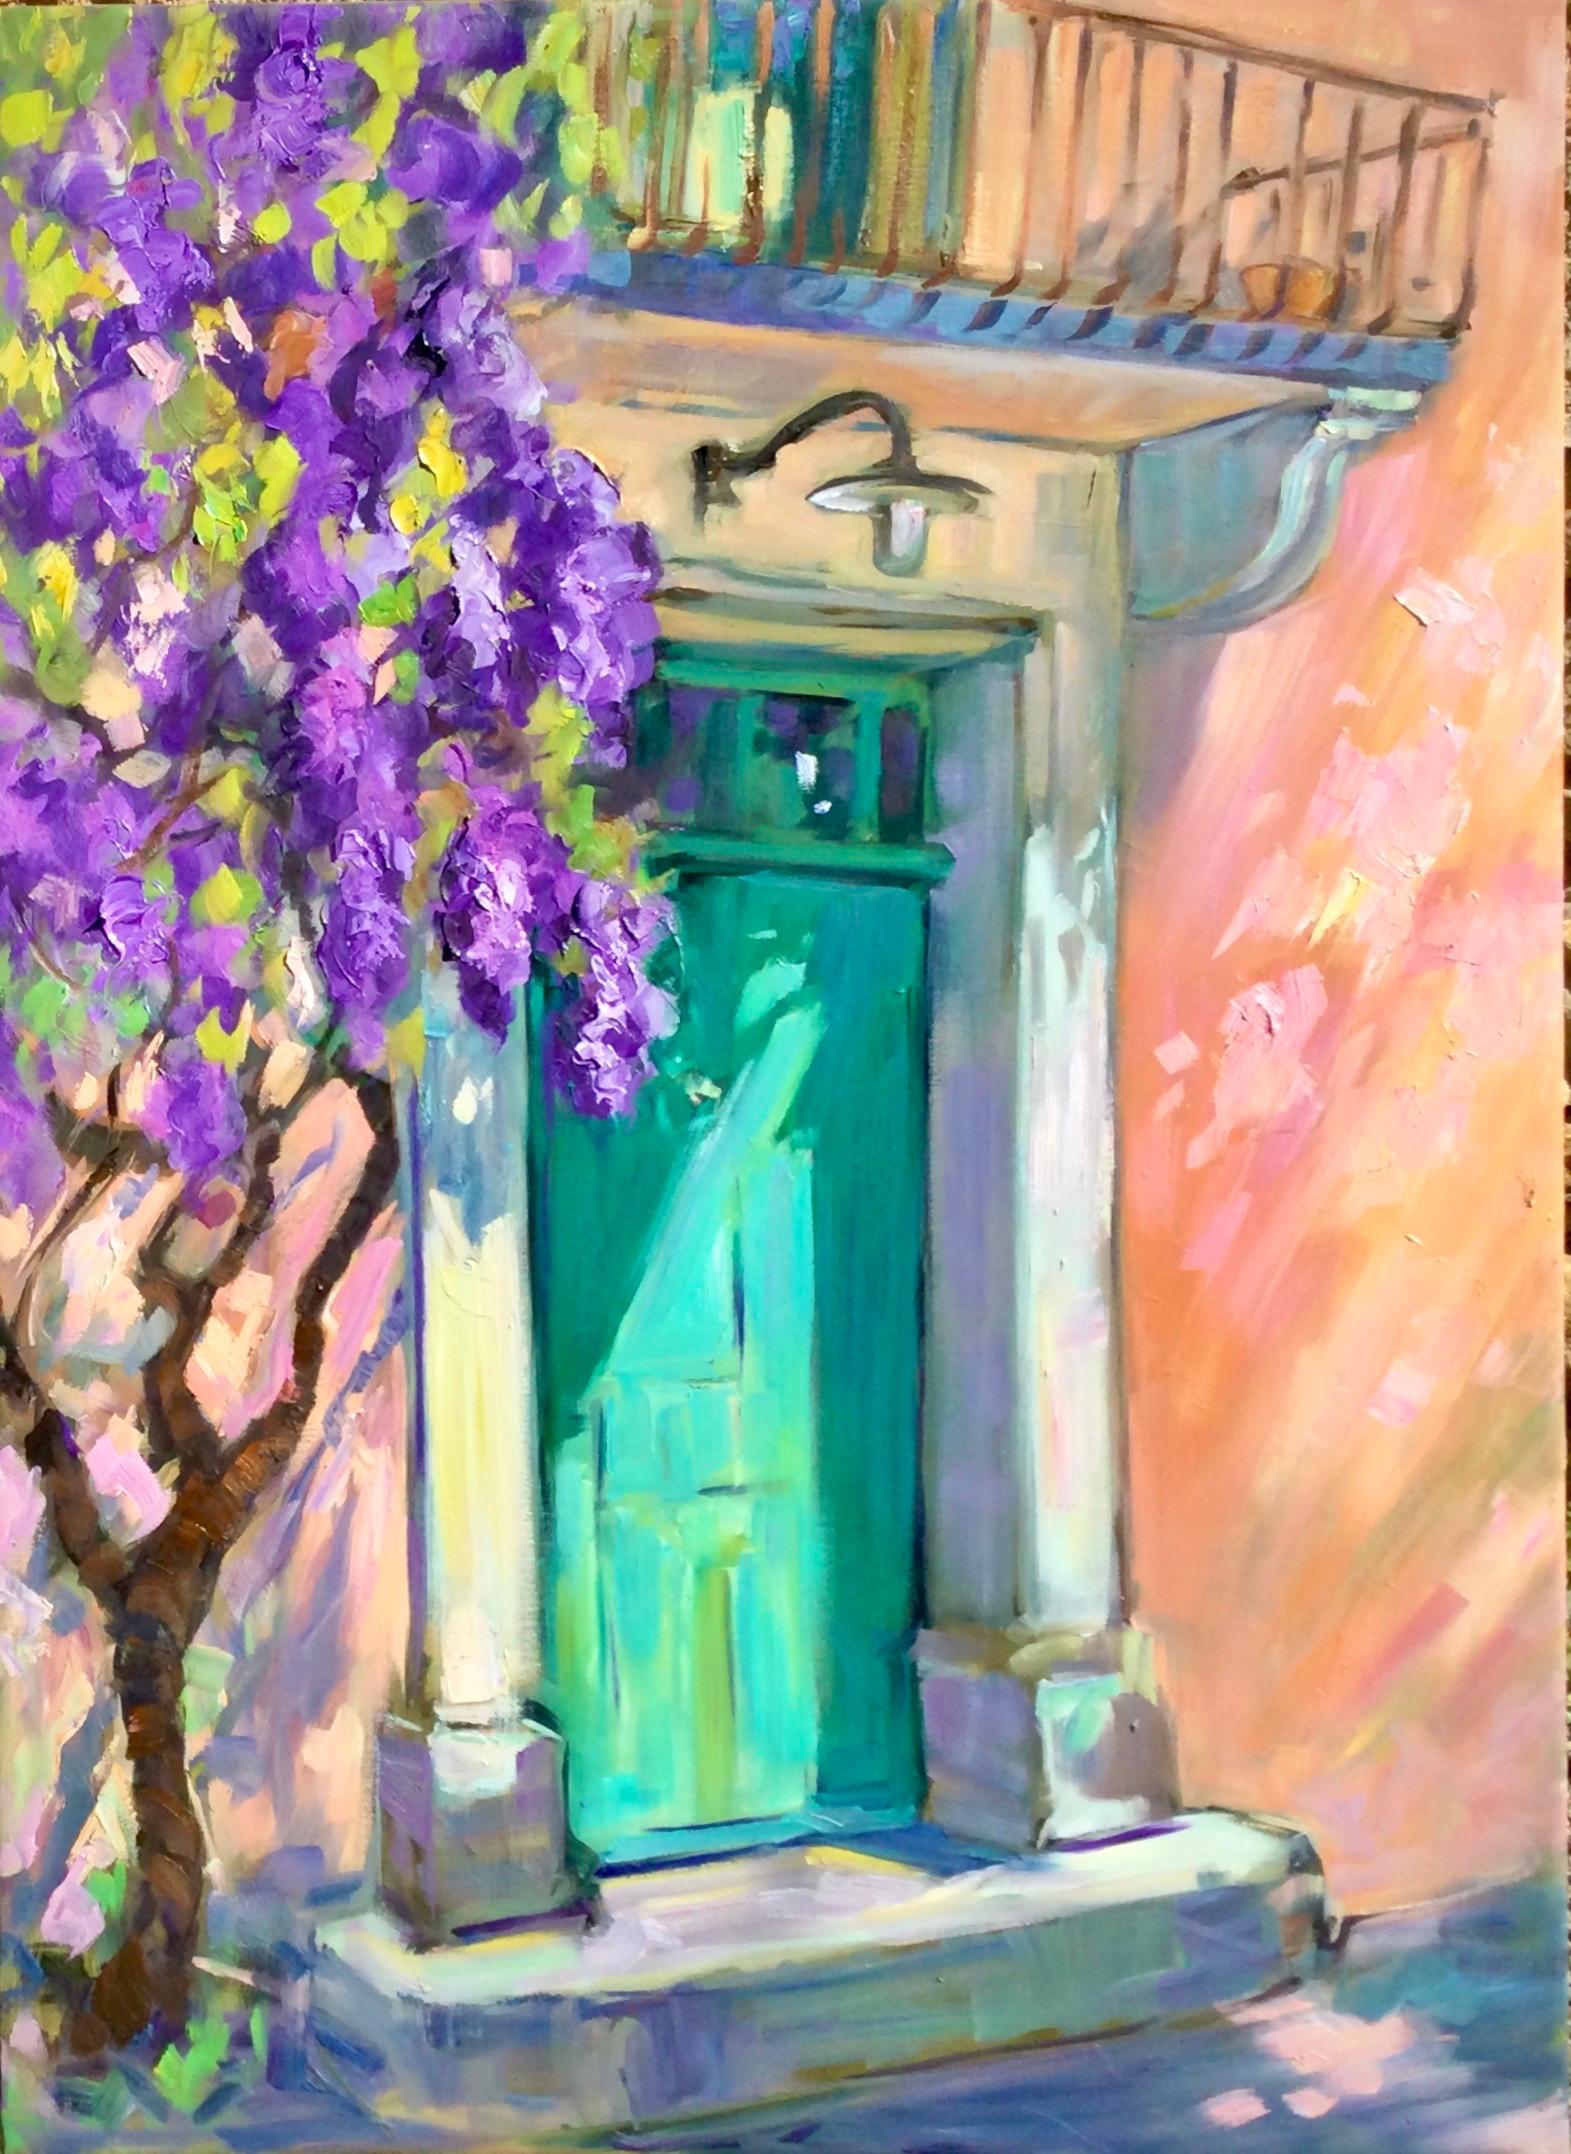 Maria Bertrán Landscape Painting - "Green door With Wisteria" Contemporary Impressionist Oil of Provence